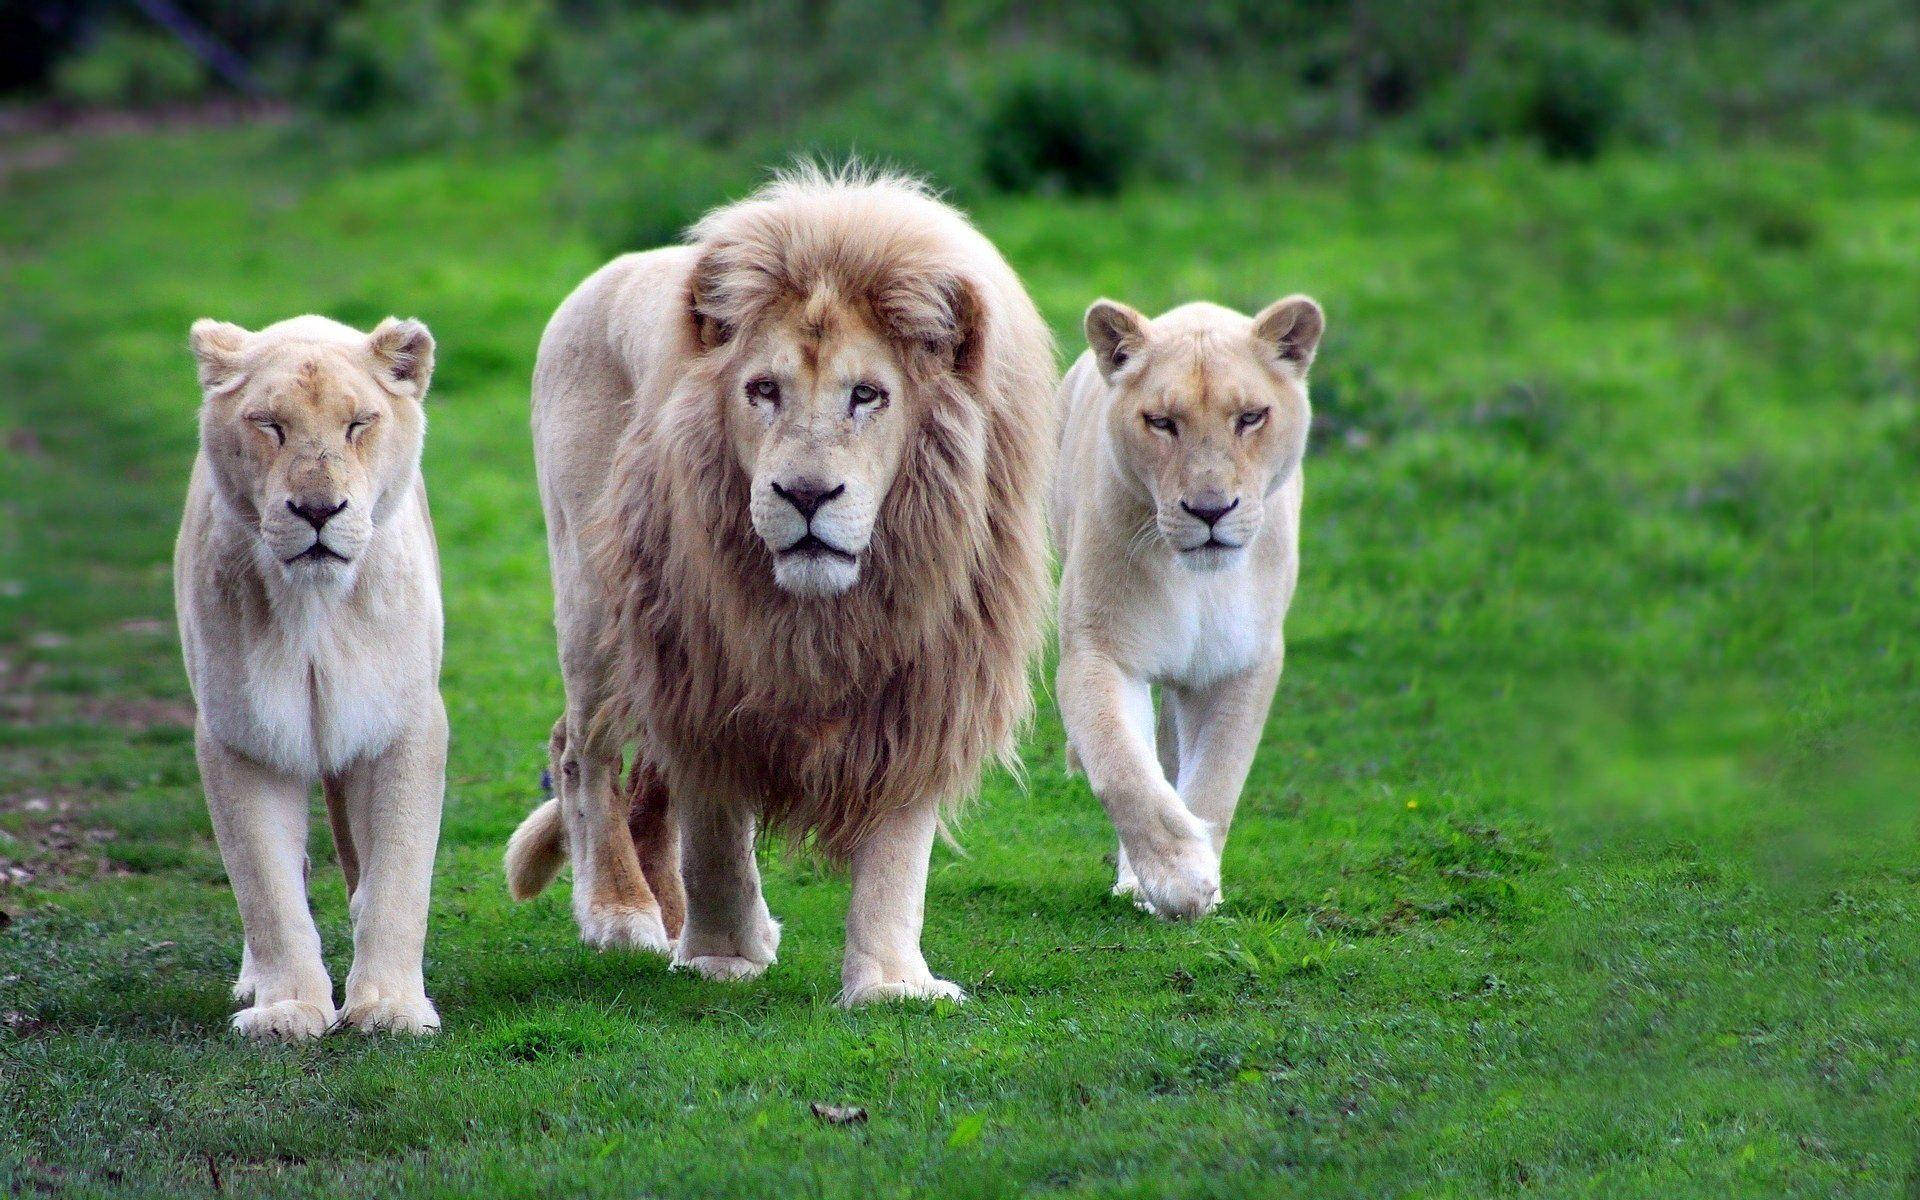 Free White Lion Wallpaper Downloads, [100+] White Lion Wallpapers for FREE  